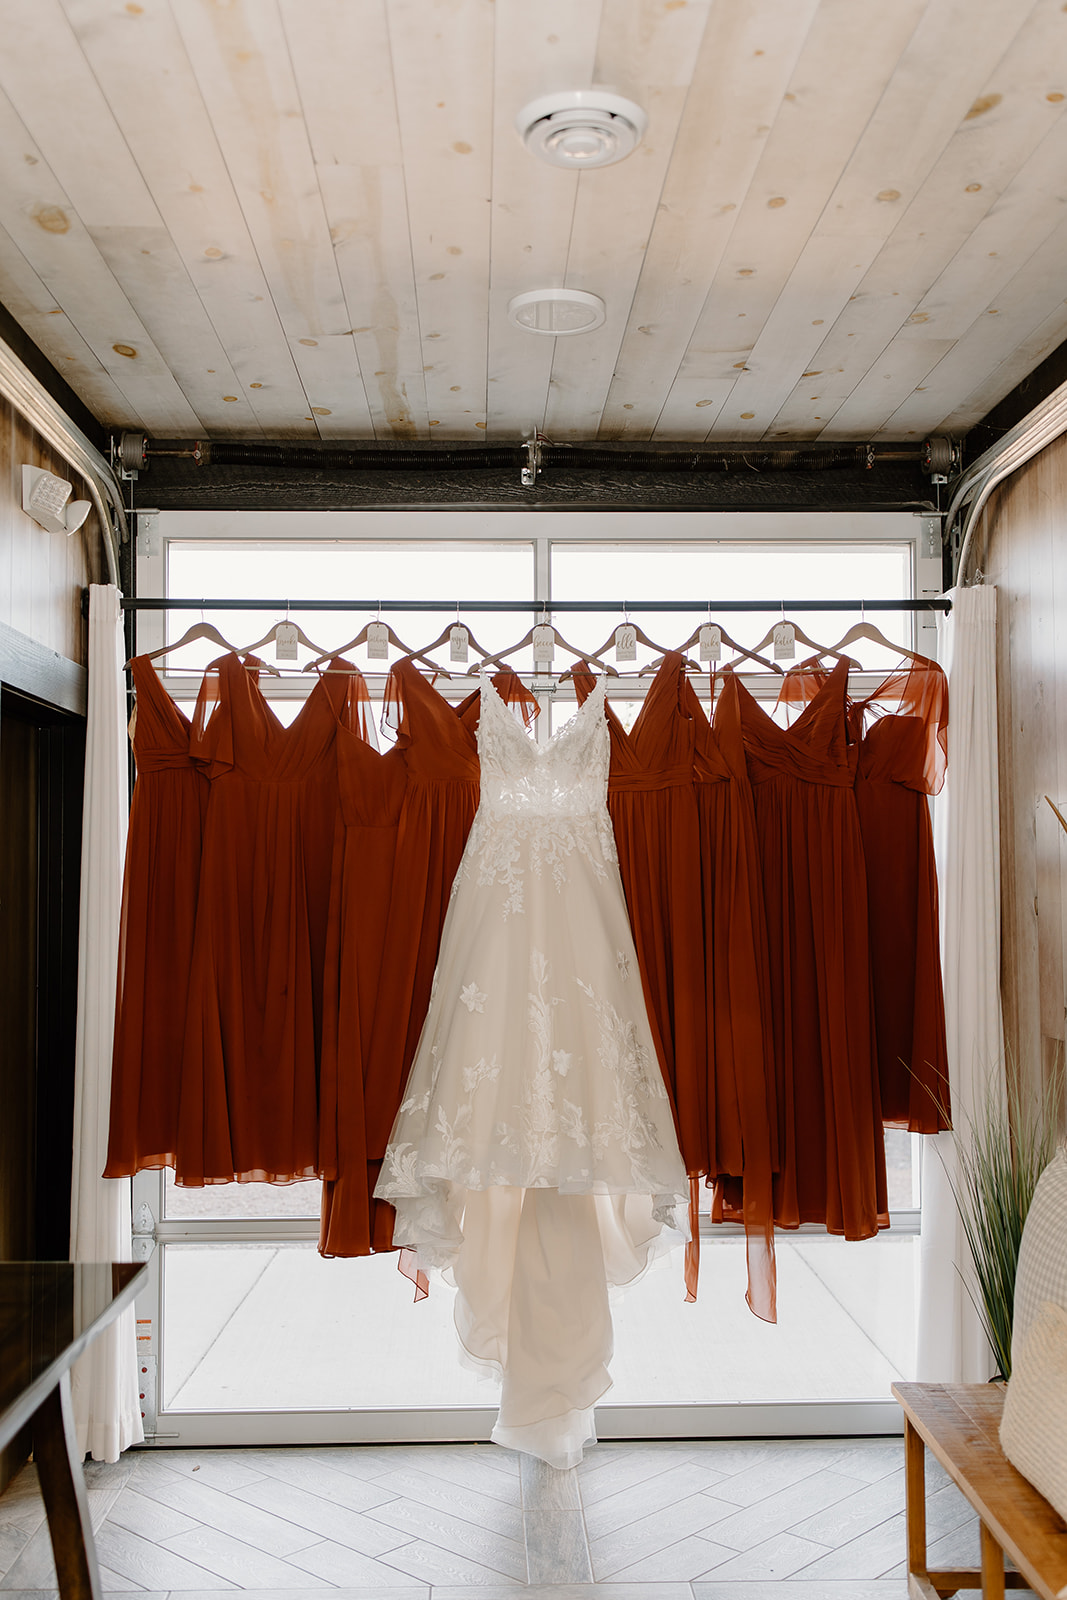 Bride's dress hanging with the bridesmaid dresses